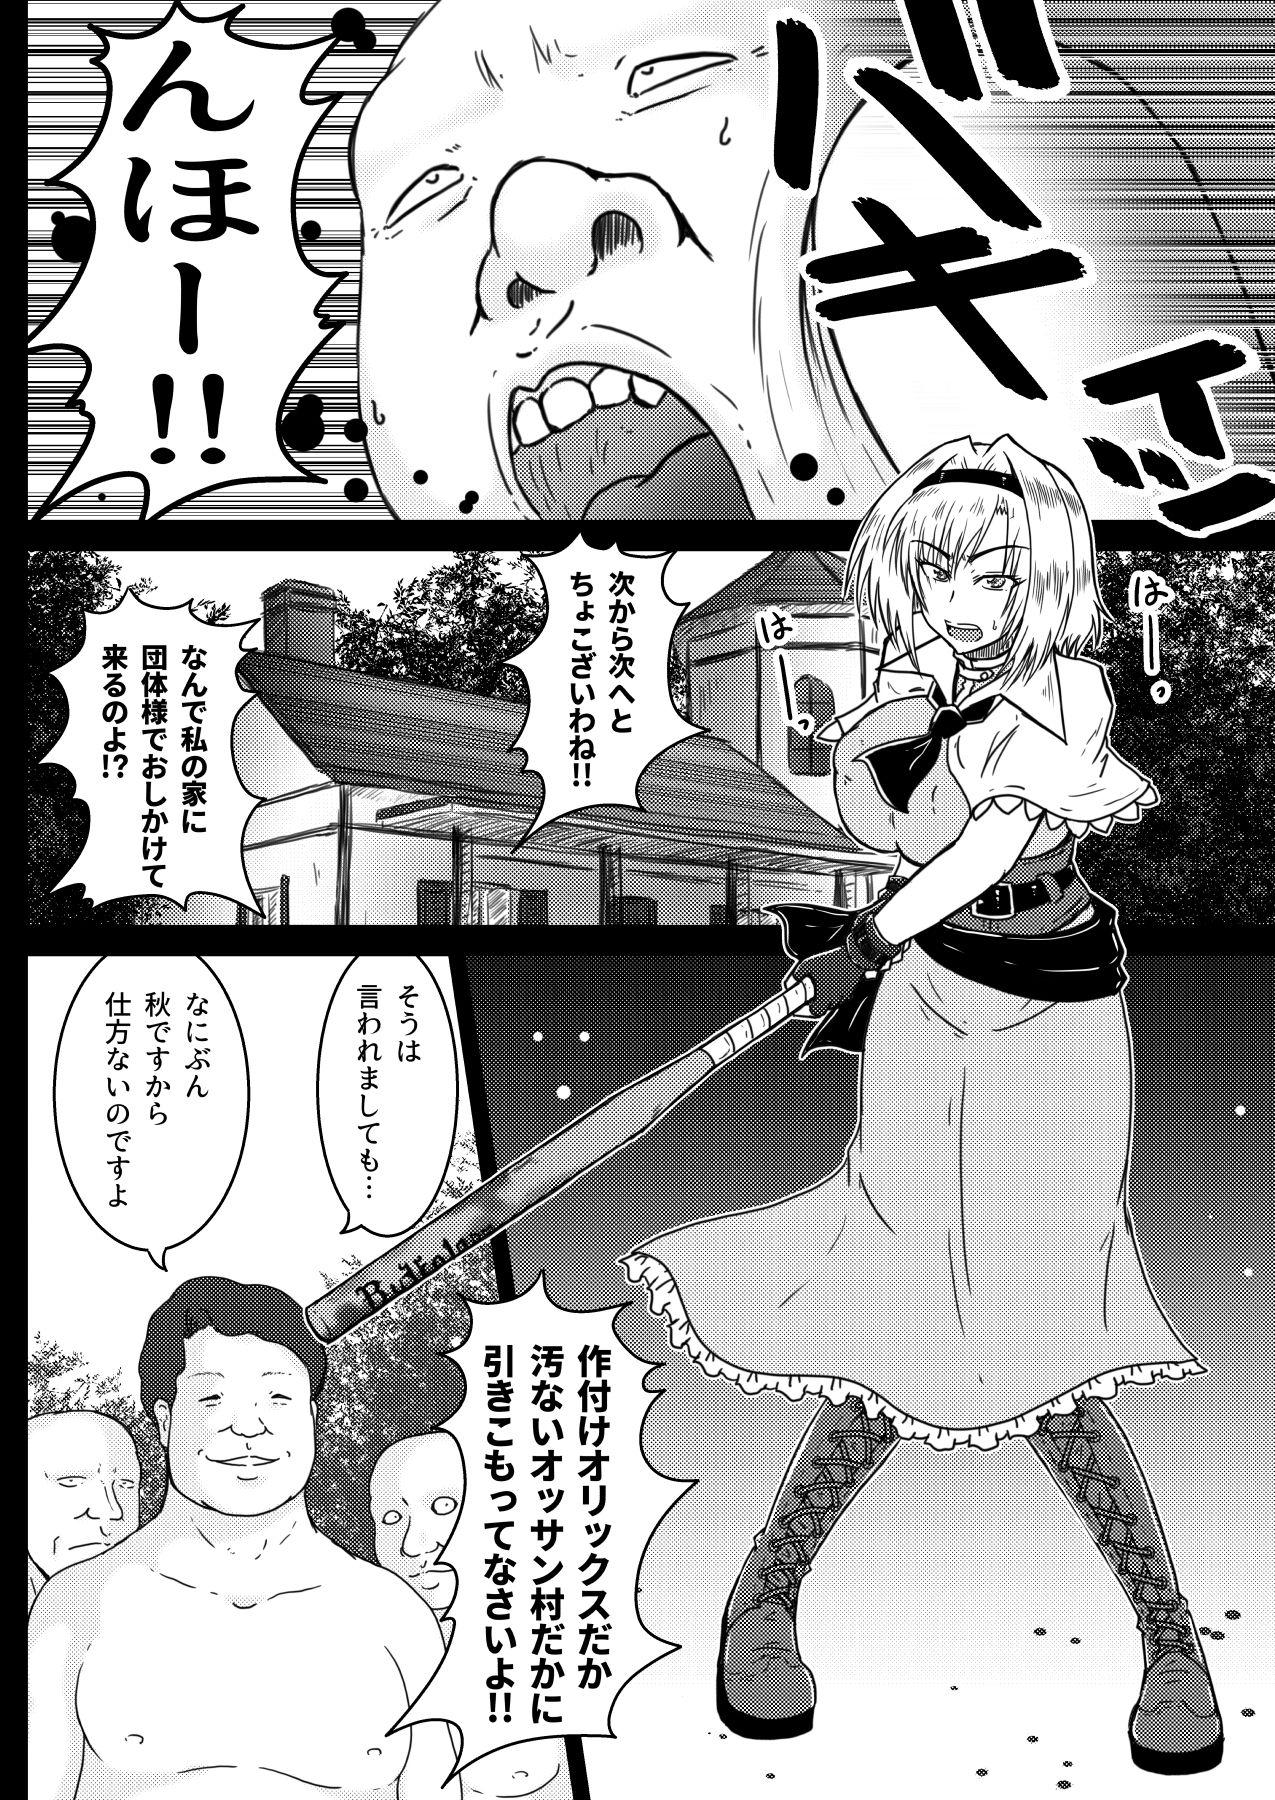 Ex Girlfriend 種付けおじさん百鬼夜行 - Touhou project Milf - Page 5